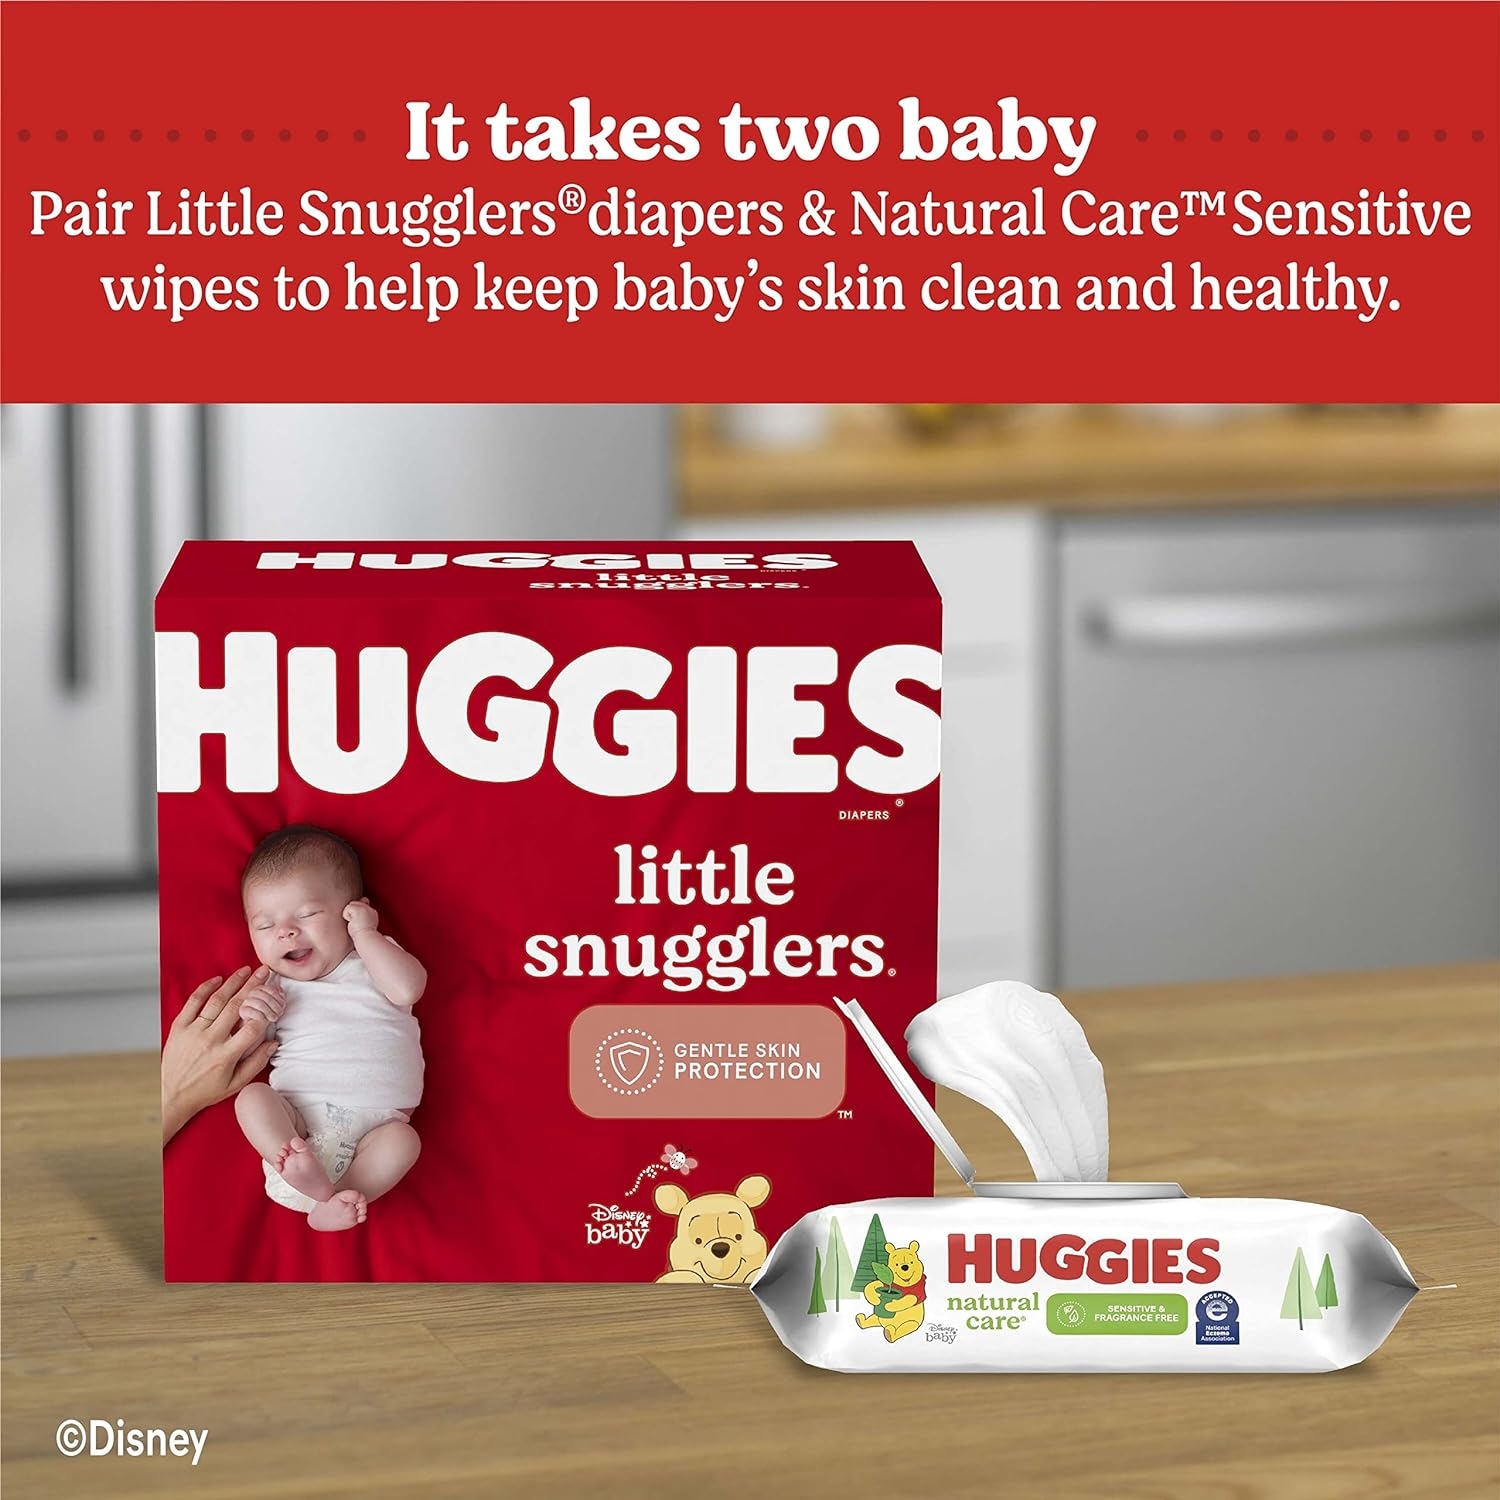 Baby Wipes, Huggies Natural Care Sensitive Baby Diaper Wipes, Unscented, Hypoallergenic, 10 Flip-Top Packs (560 Wipes Total)